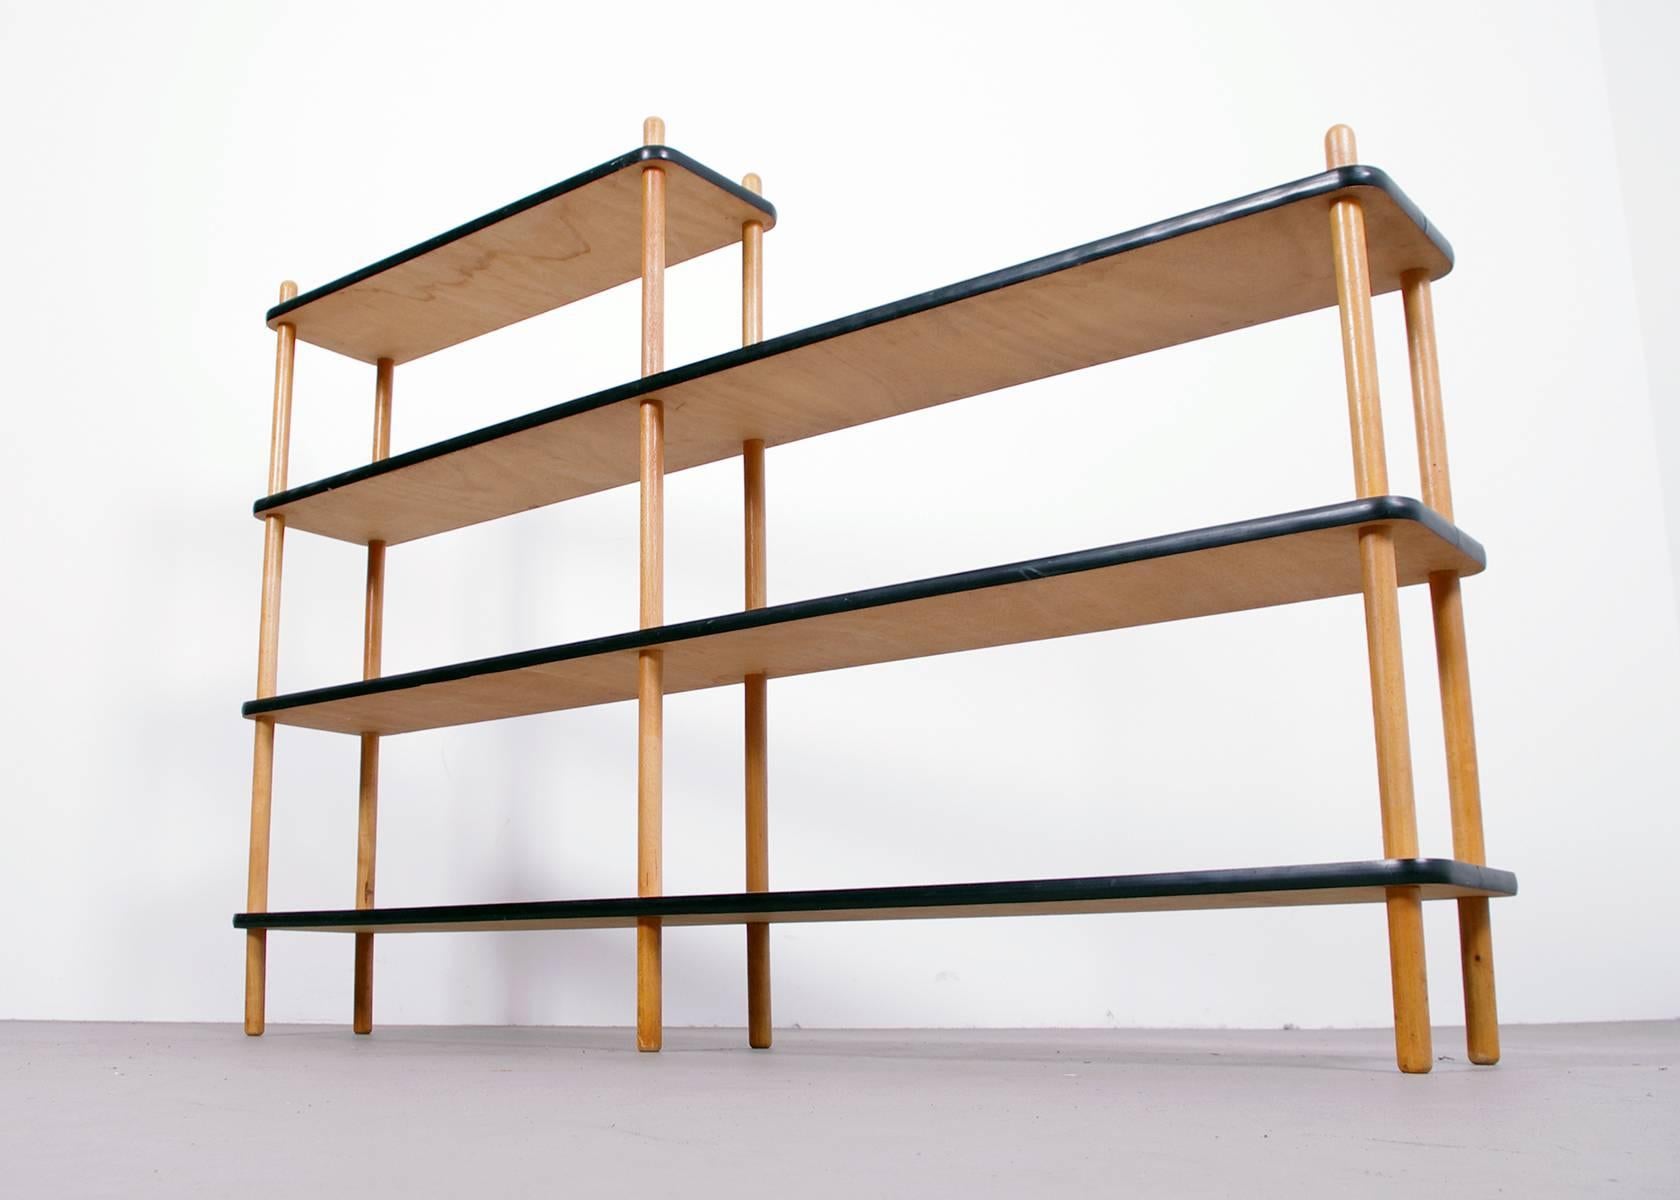 Simple and elegant room divider / bookcase in the style of Willem Lutjens.
Formica shelves and beechwood sticks. Easy to transport / disassembling.

Free shipping for European destinations!

We strive for a high level of service and offer: